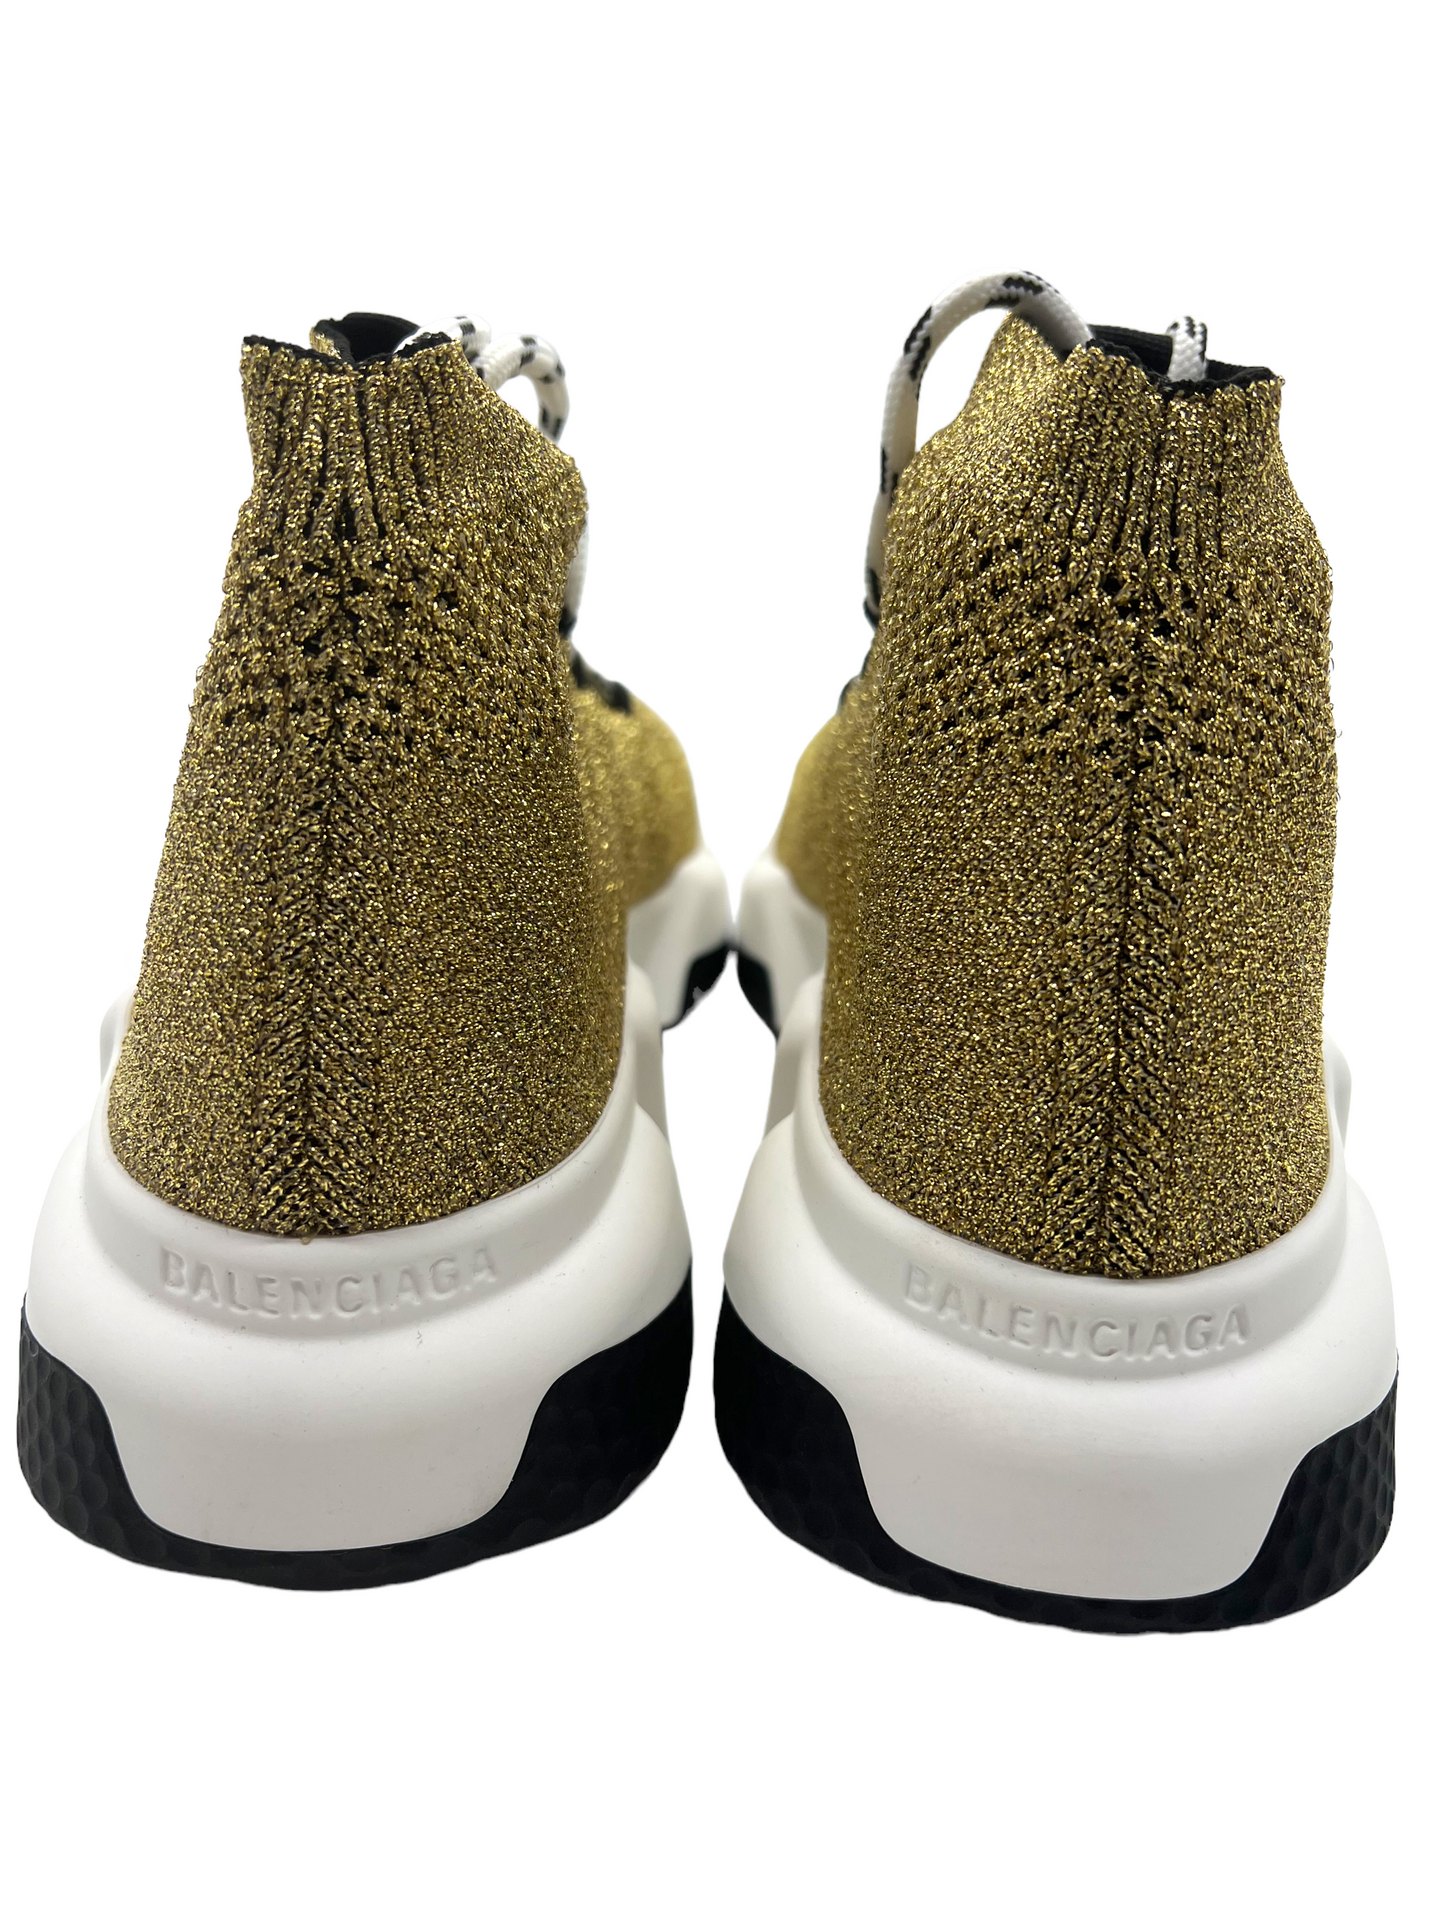 Balenciaga Gold Metallic Knit Lace Up Size 8 Speed Trainer Sneakers